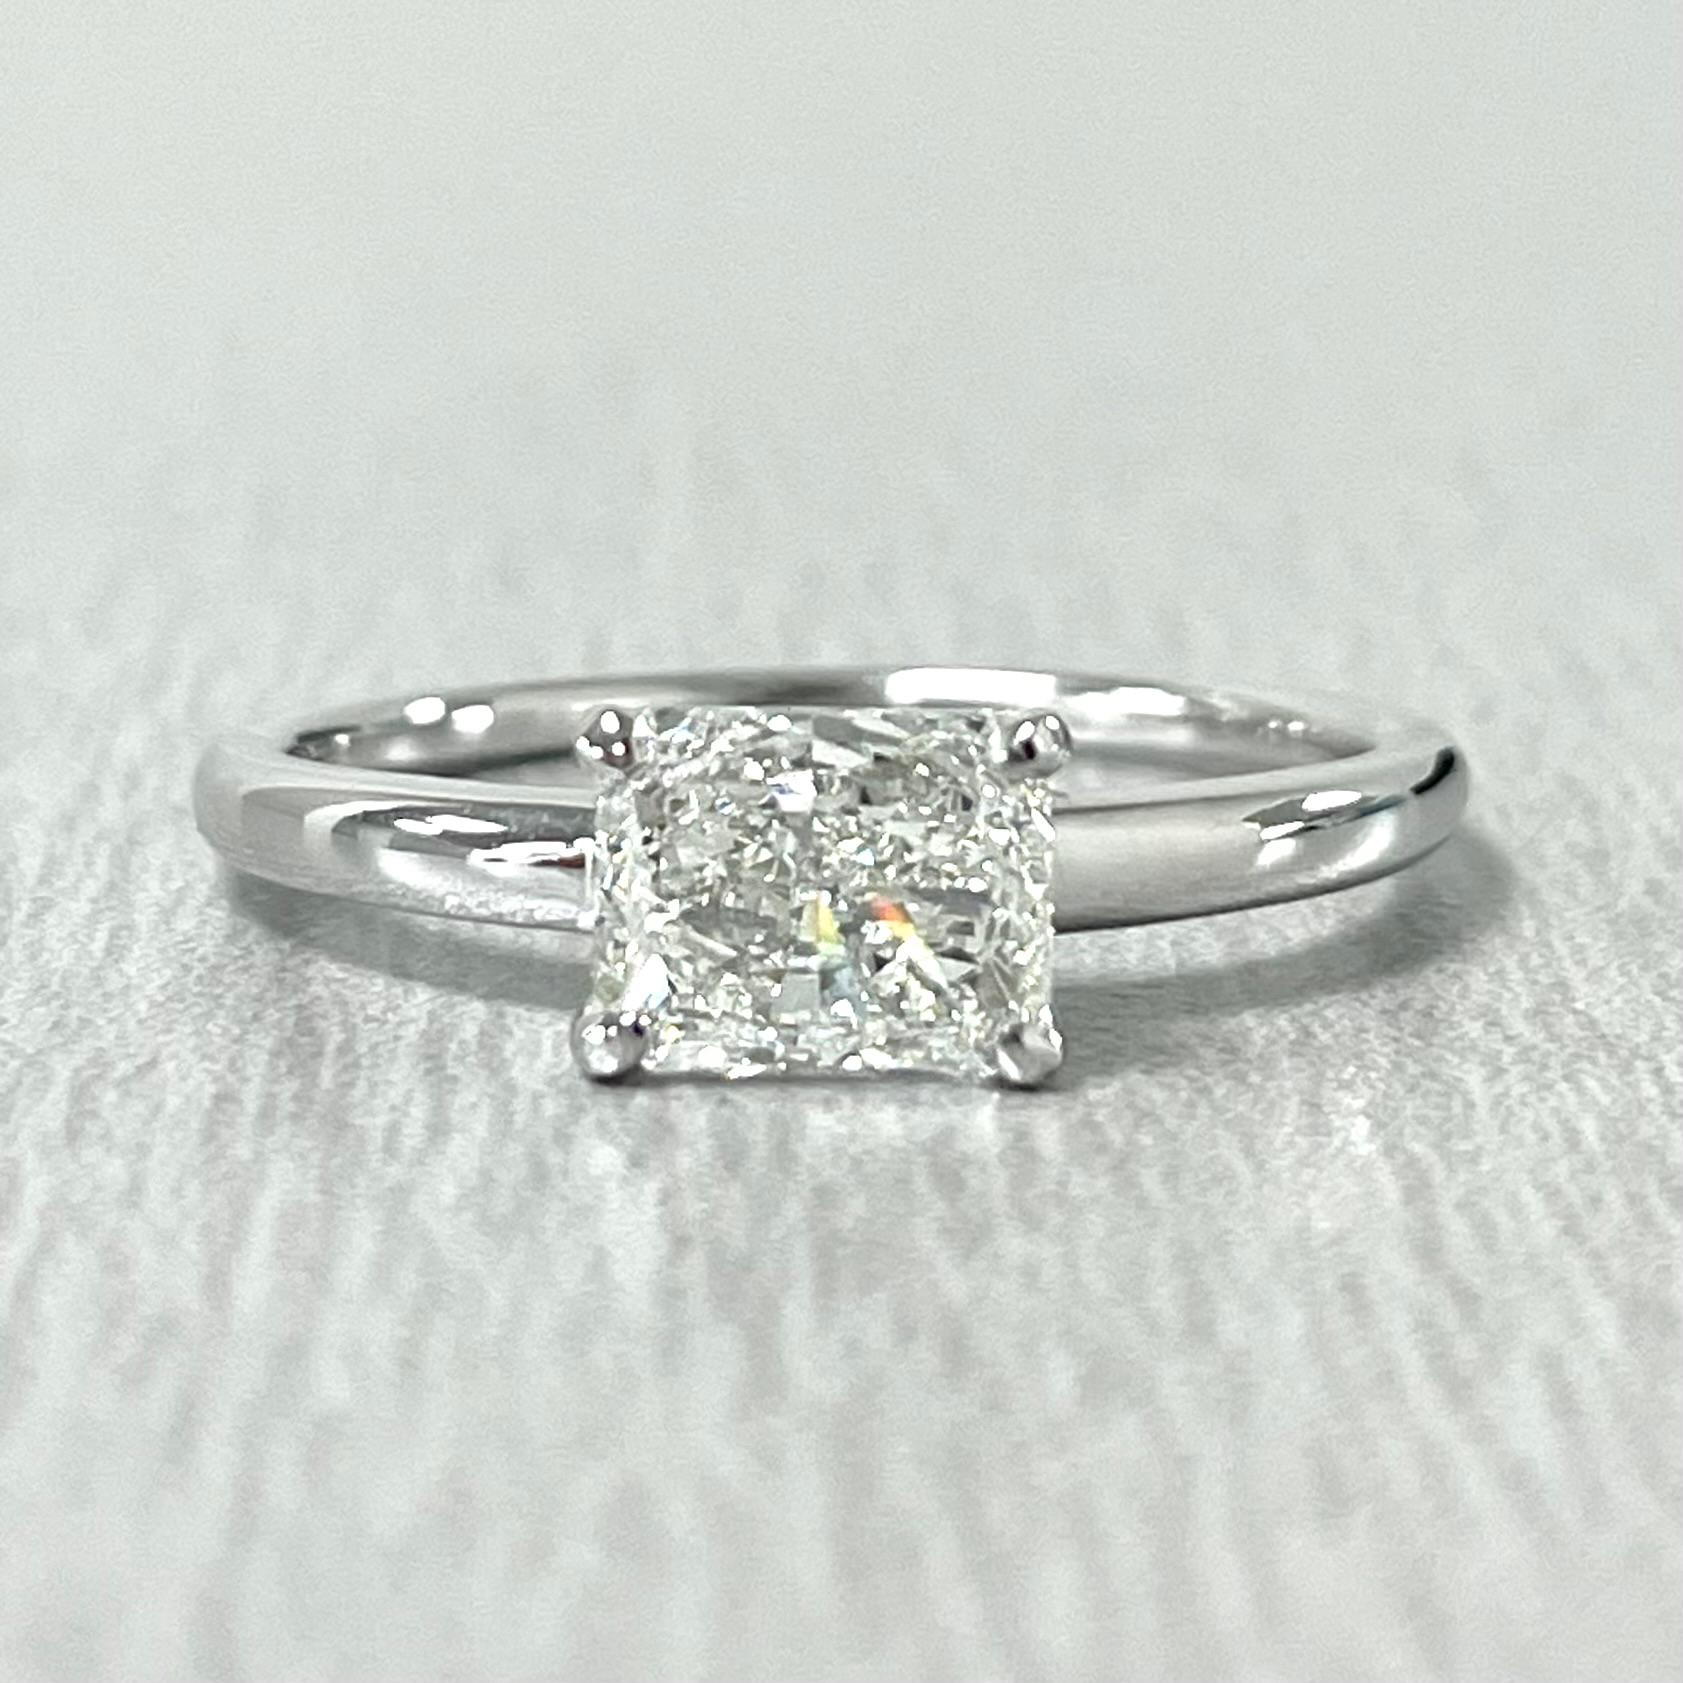 This stunning 1.01 Carat Radiant Cut HVS2 Solitaire Ring is all the bang for the buck. With larger measurement and stunning fire and luster, it is a dazzler. The East West Set Diamond gives the ring a modern and chic flare making it the perfect